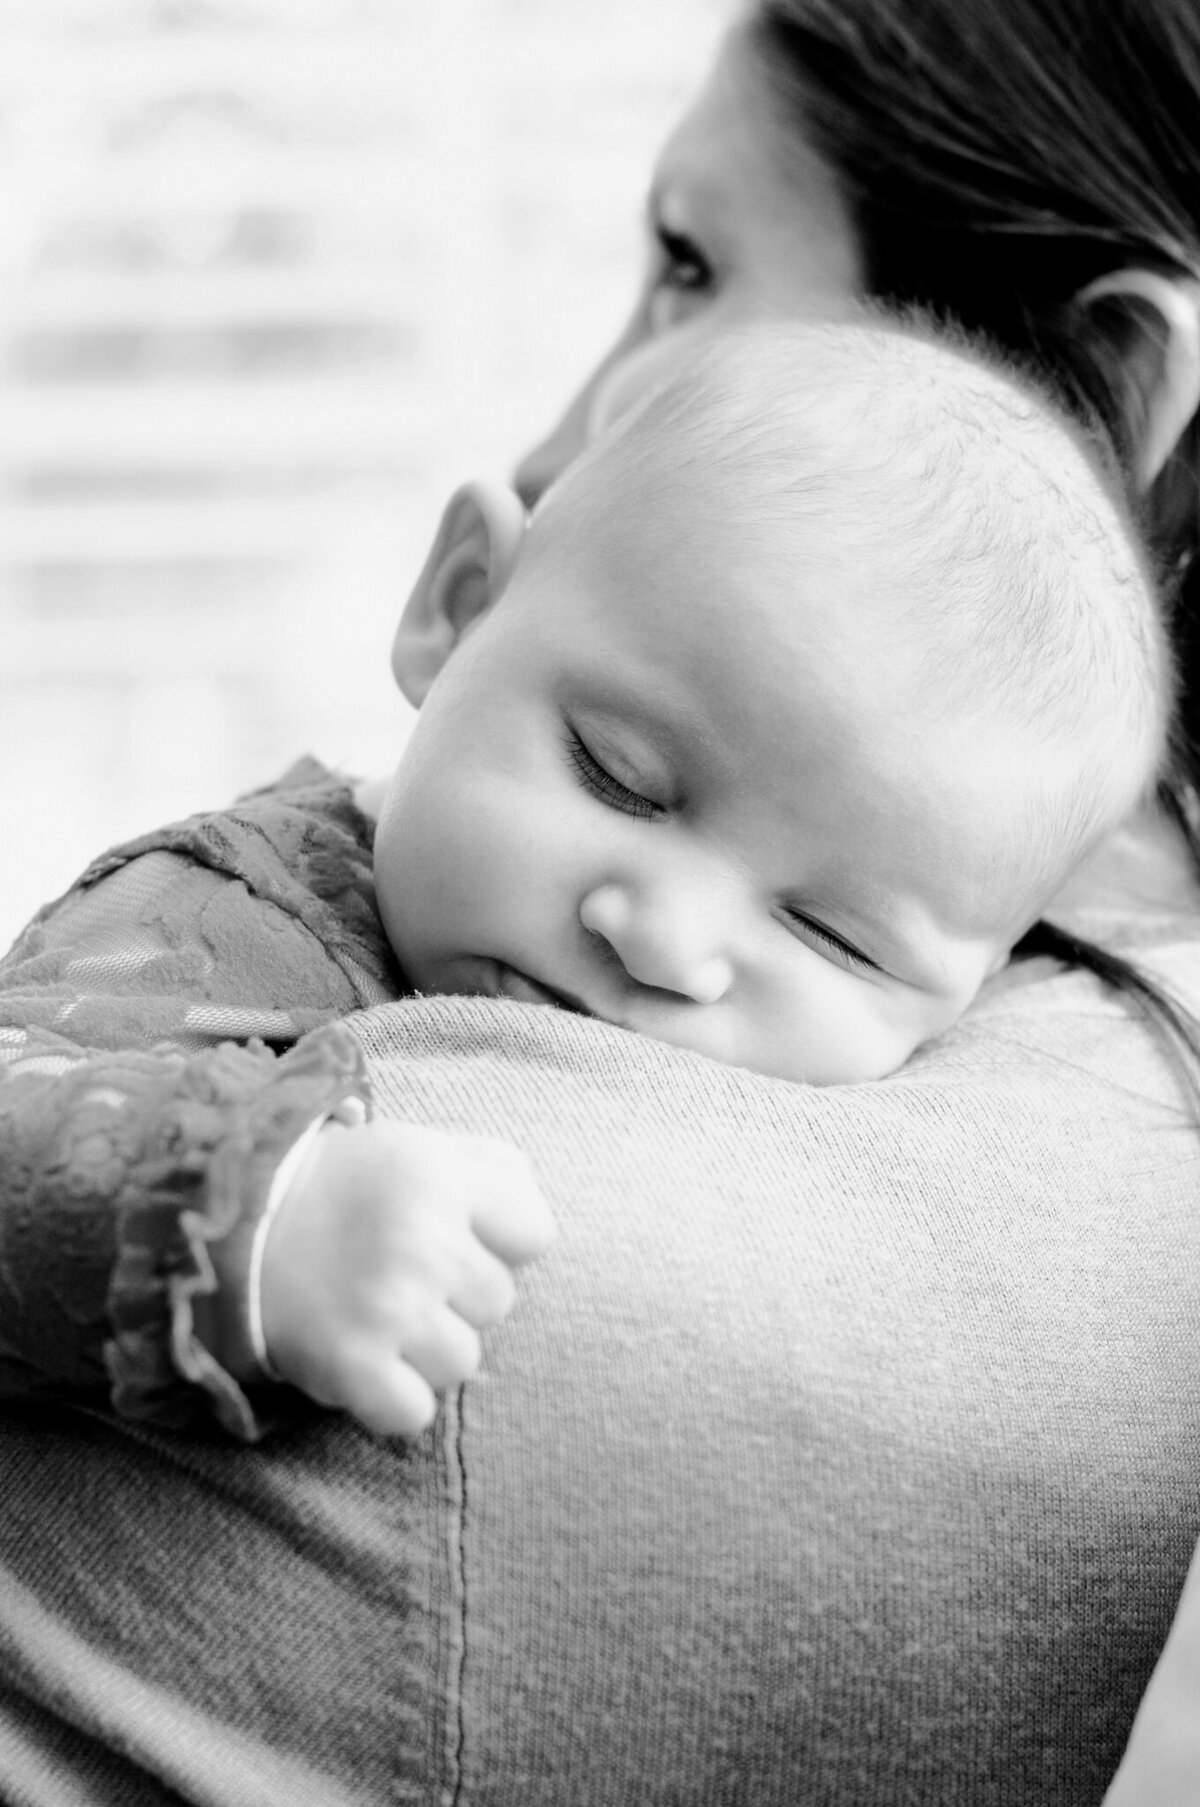 Black and white newborn photography image of a baby asleep on her mom's shoulder, by San Antonio newborn lifestyle photographer Cassey Golden.